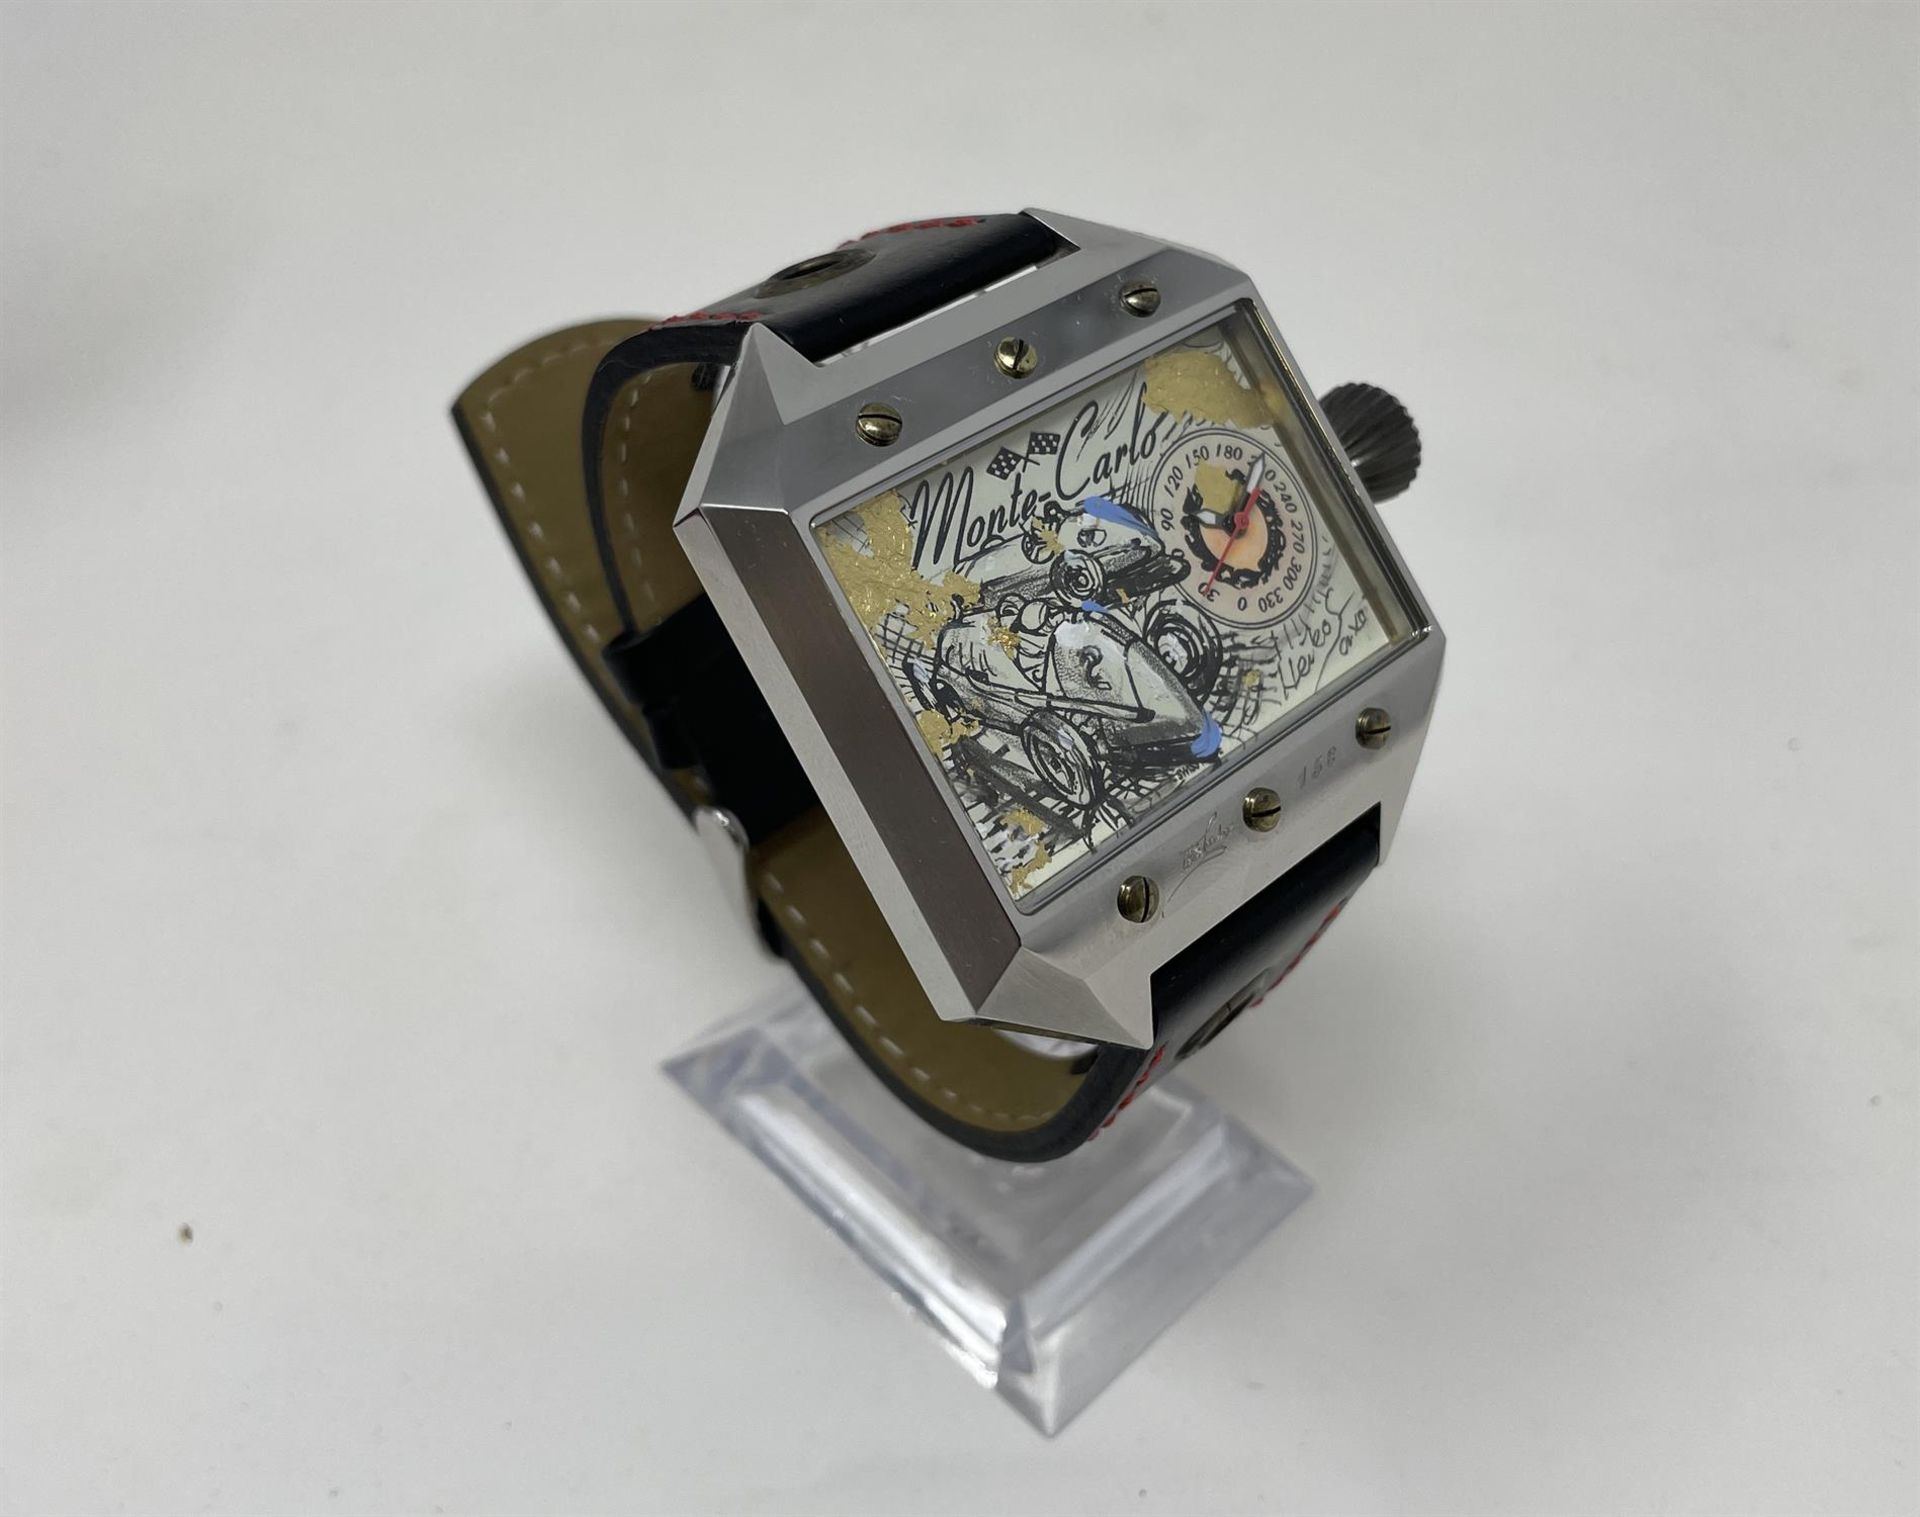 Heiko Saxo Monte Carlo Limited Edition Wristwatch with Unique Hand-Painted Face - Image 10 of 10